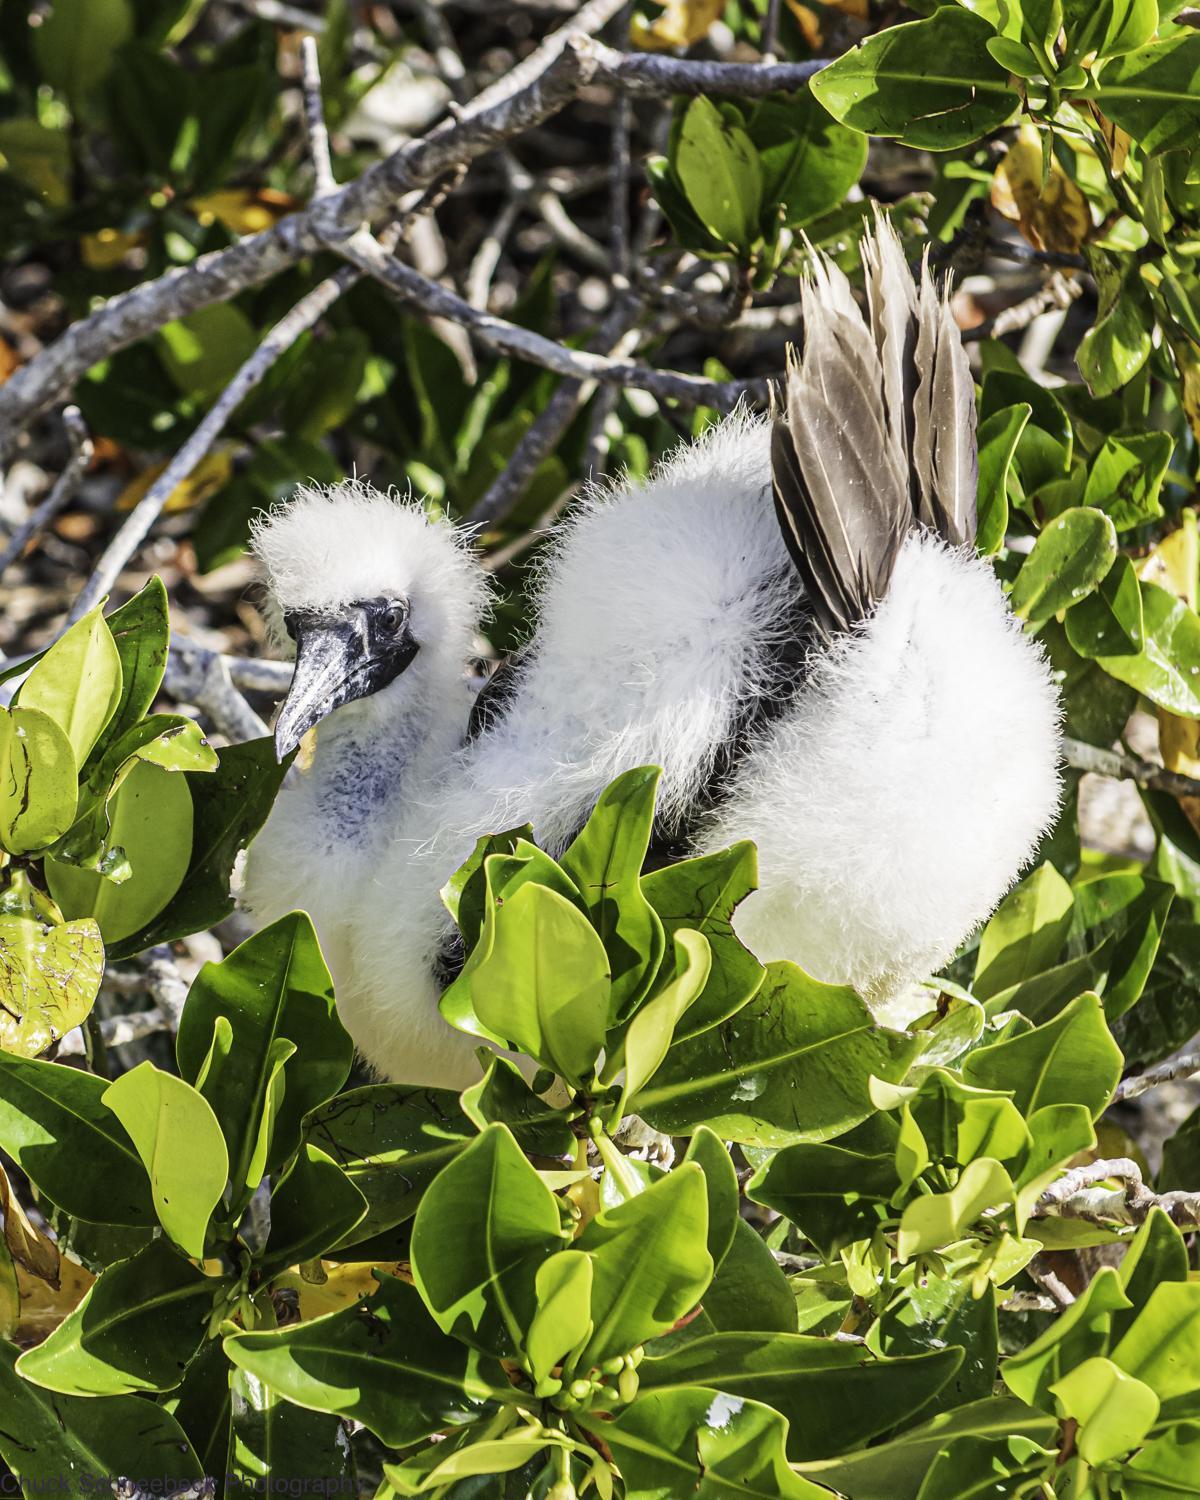 Red-footed Booby Photo by Chuck  Schneebeck